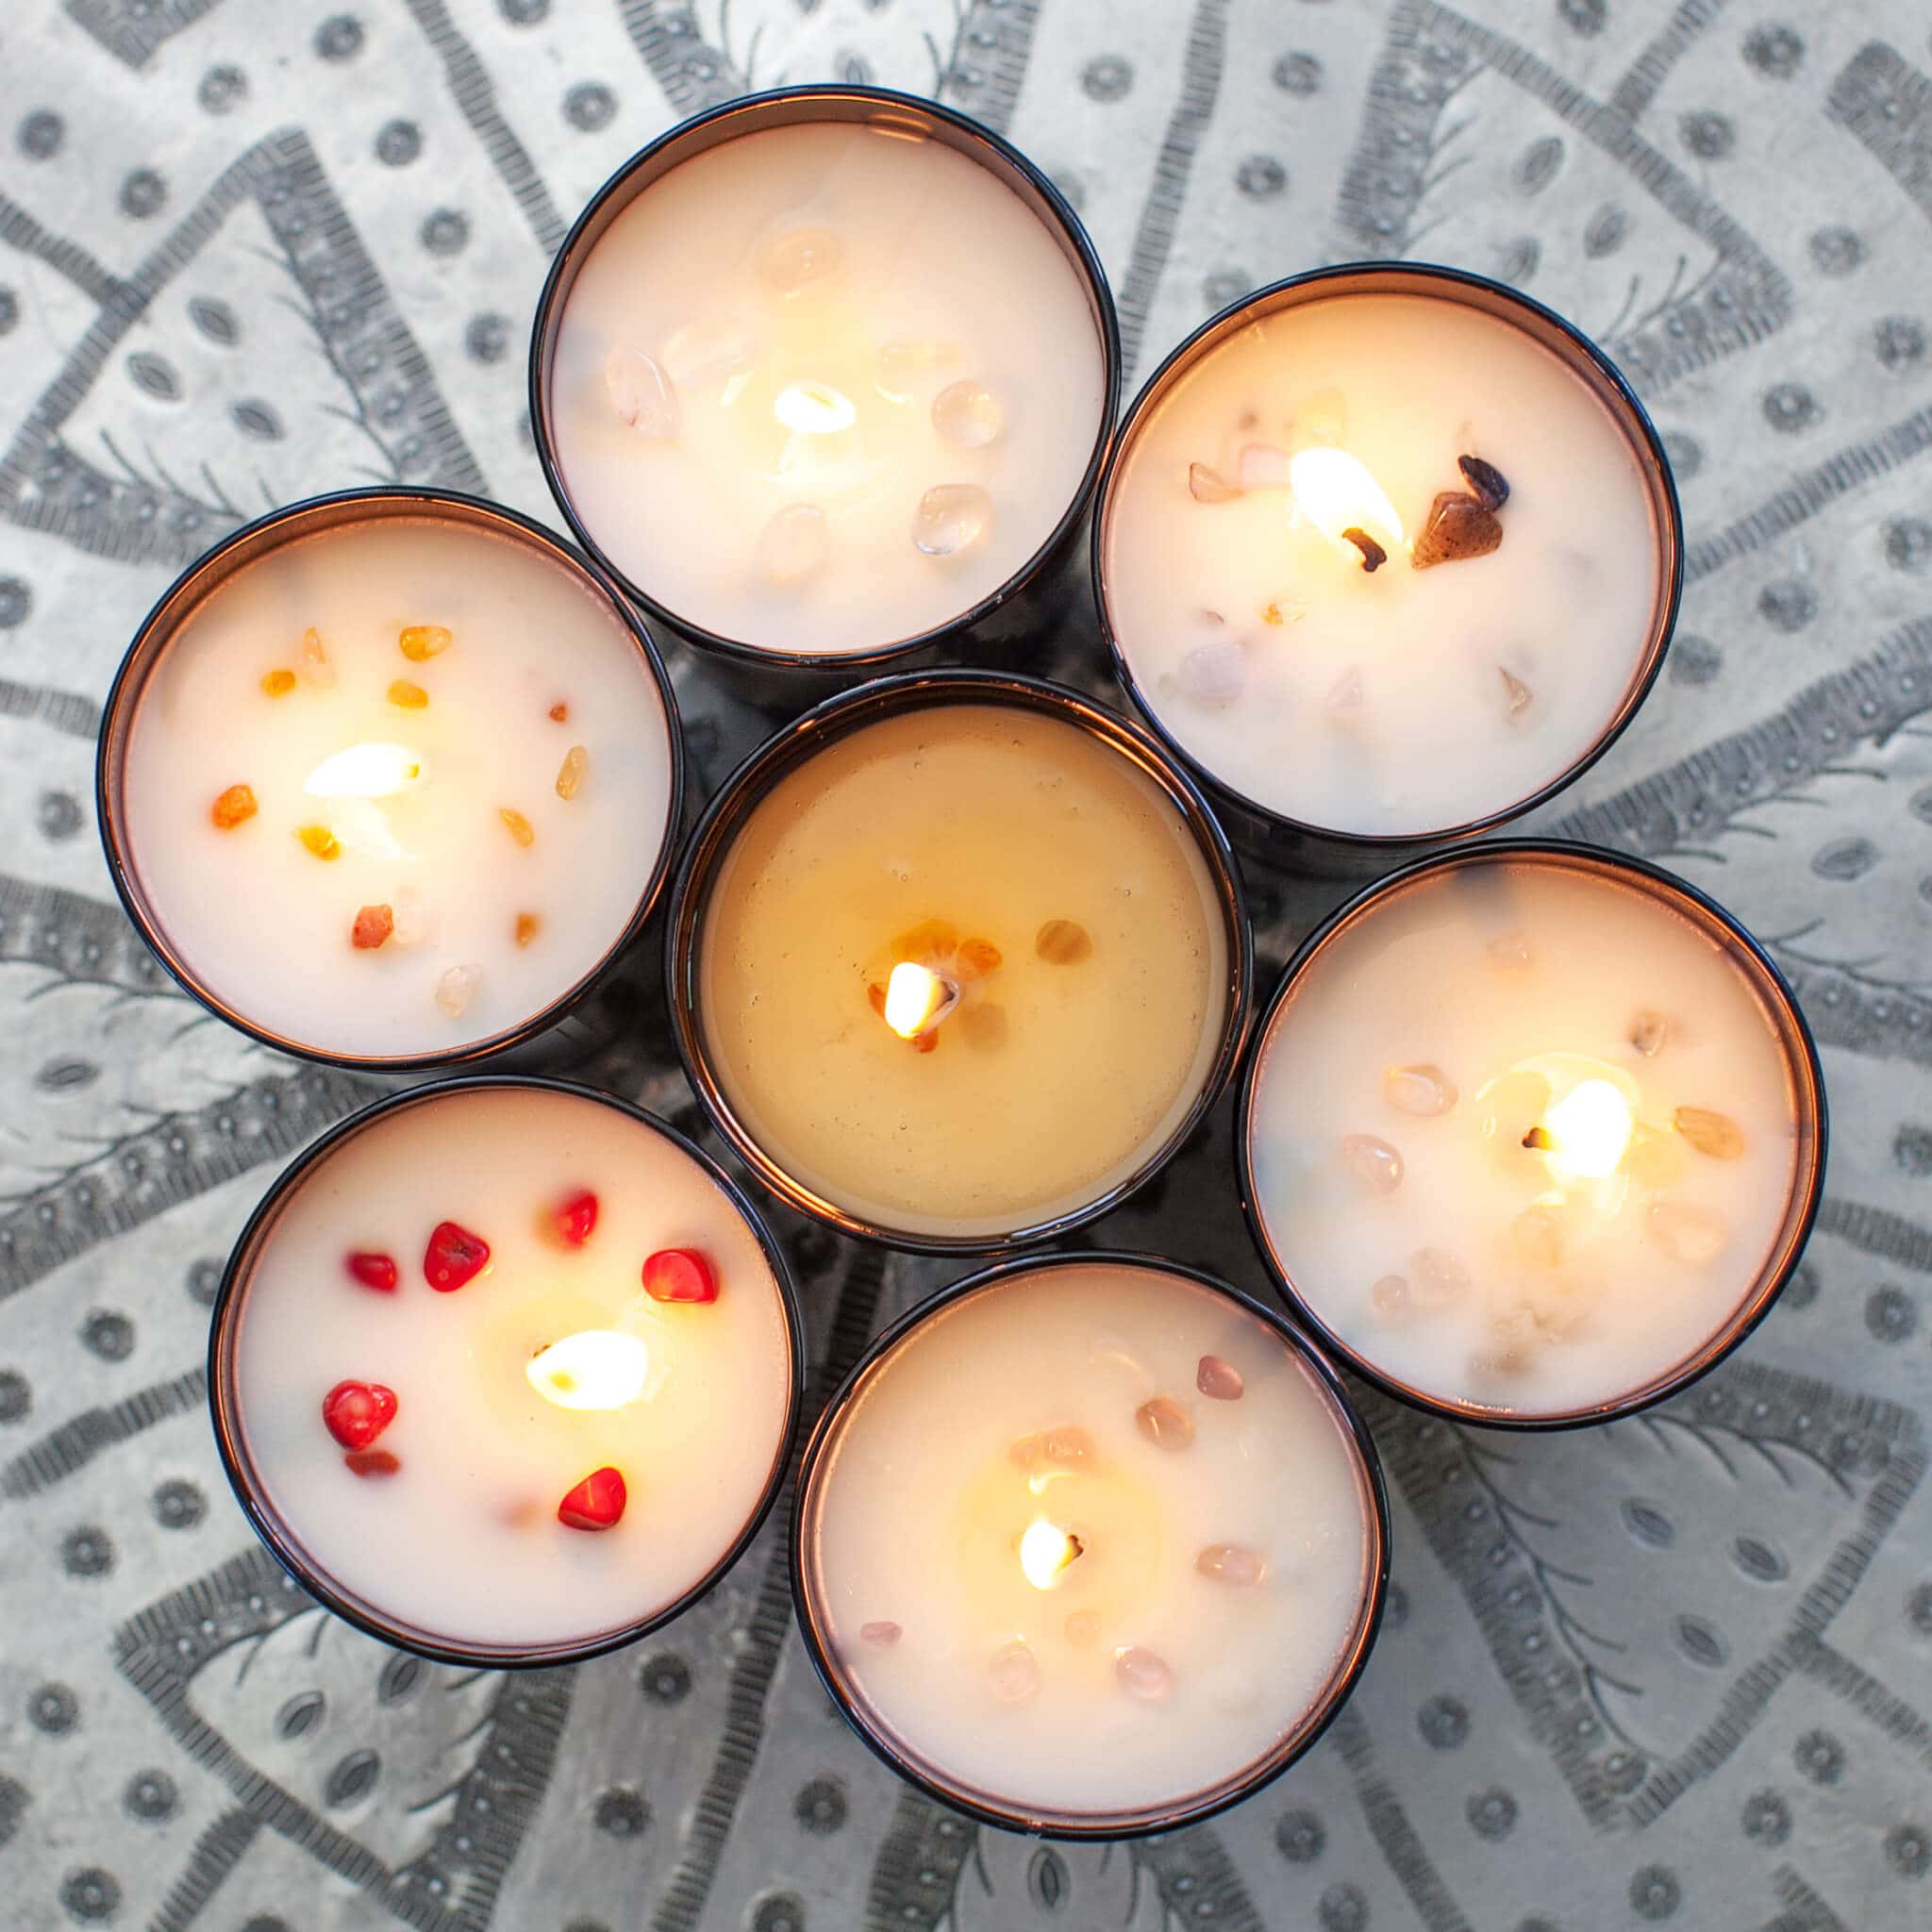 Pack of 7 Candles